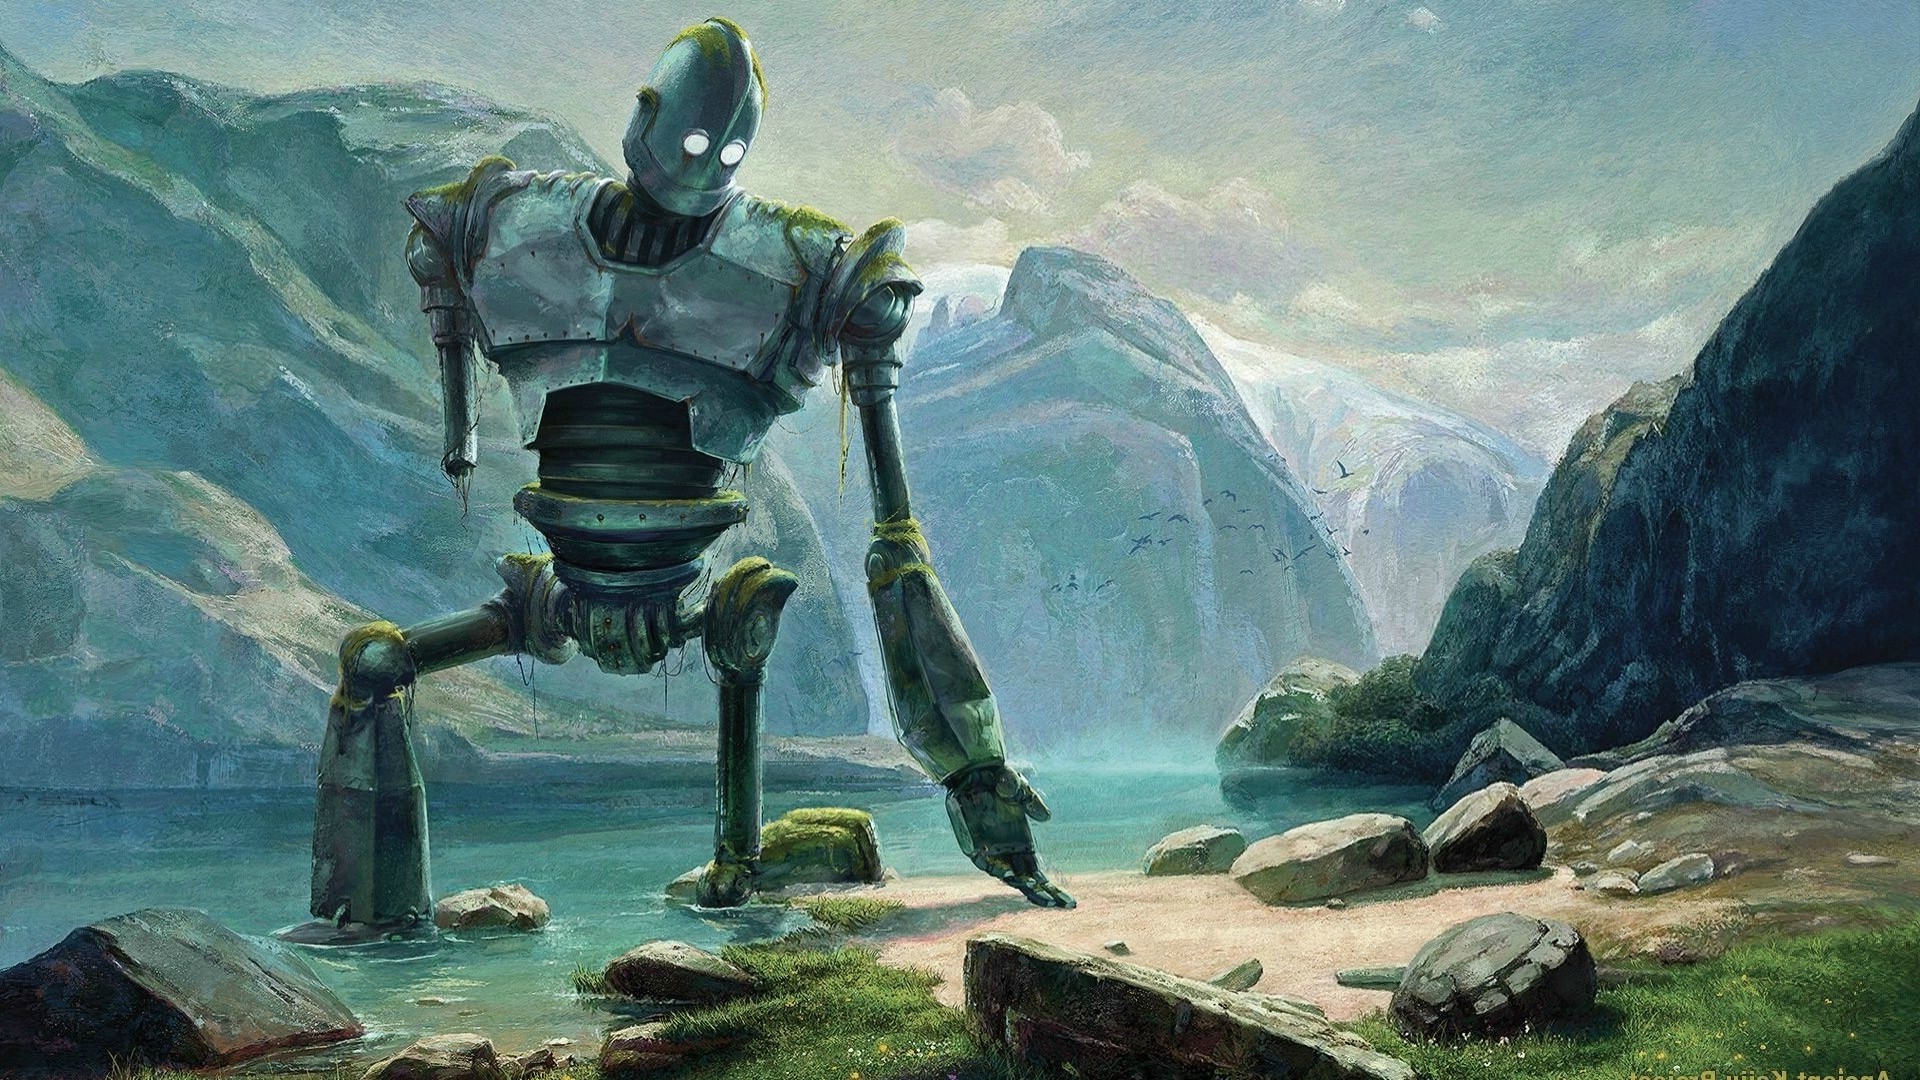 the iron giant wallpaper,action adventure game,pc game,adventure game,games,cg artwork